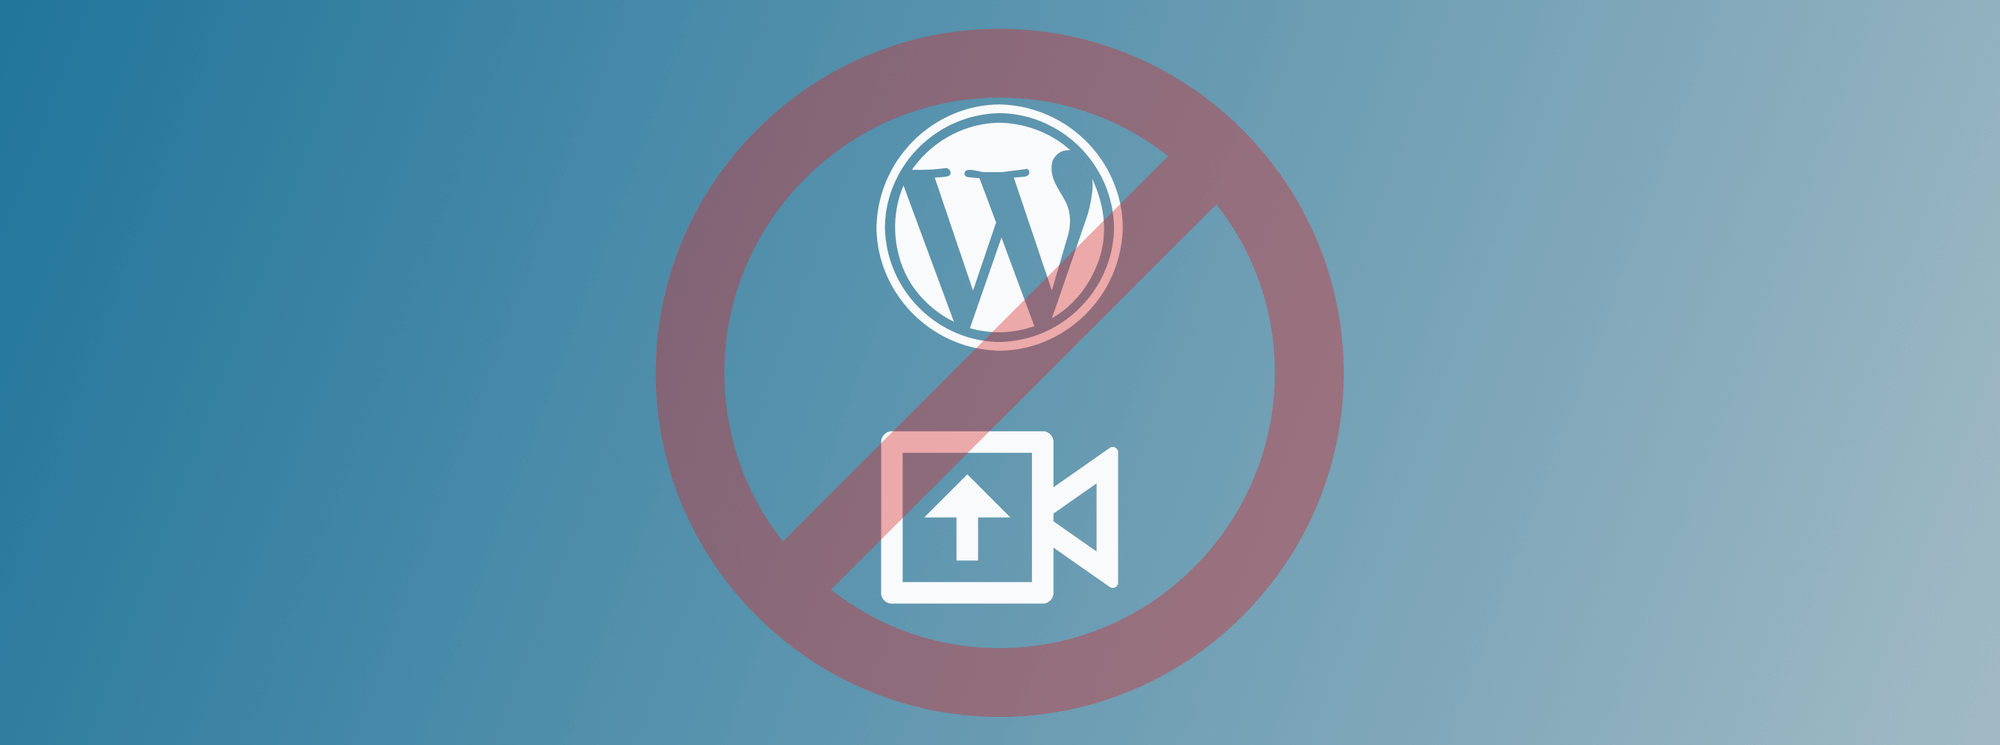 Why You Should Never Upload Your Video to Your WordPress Website